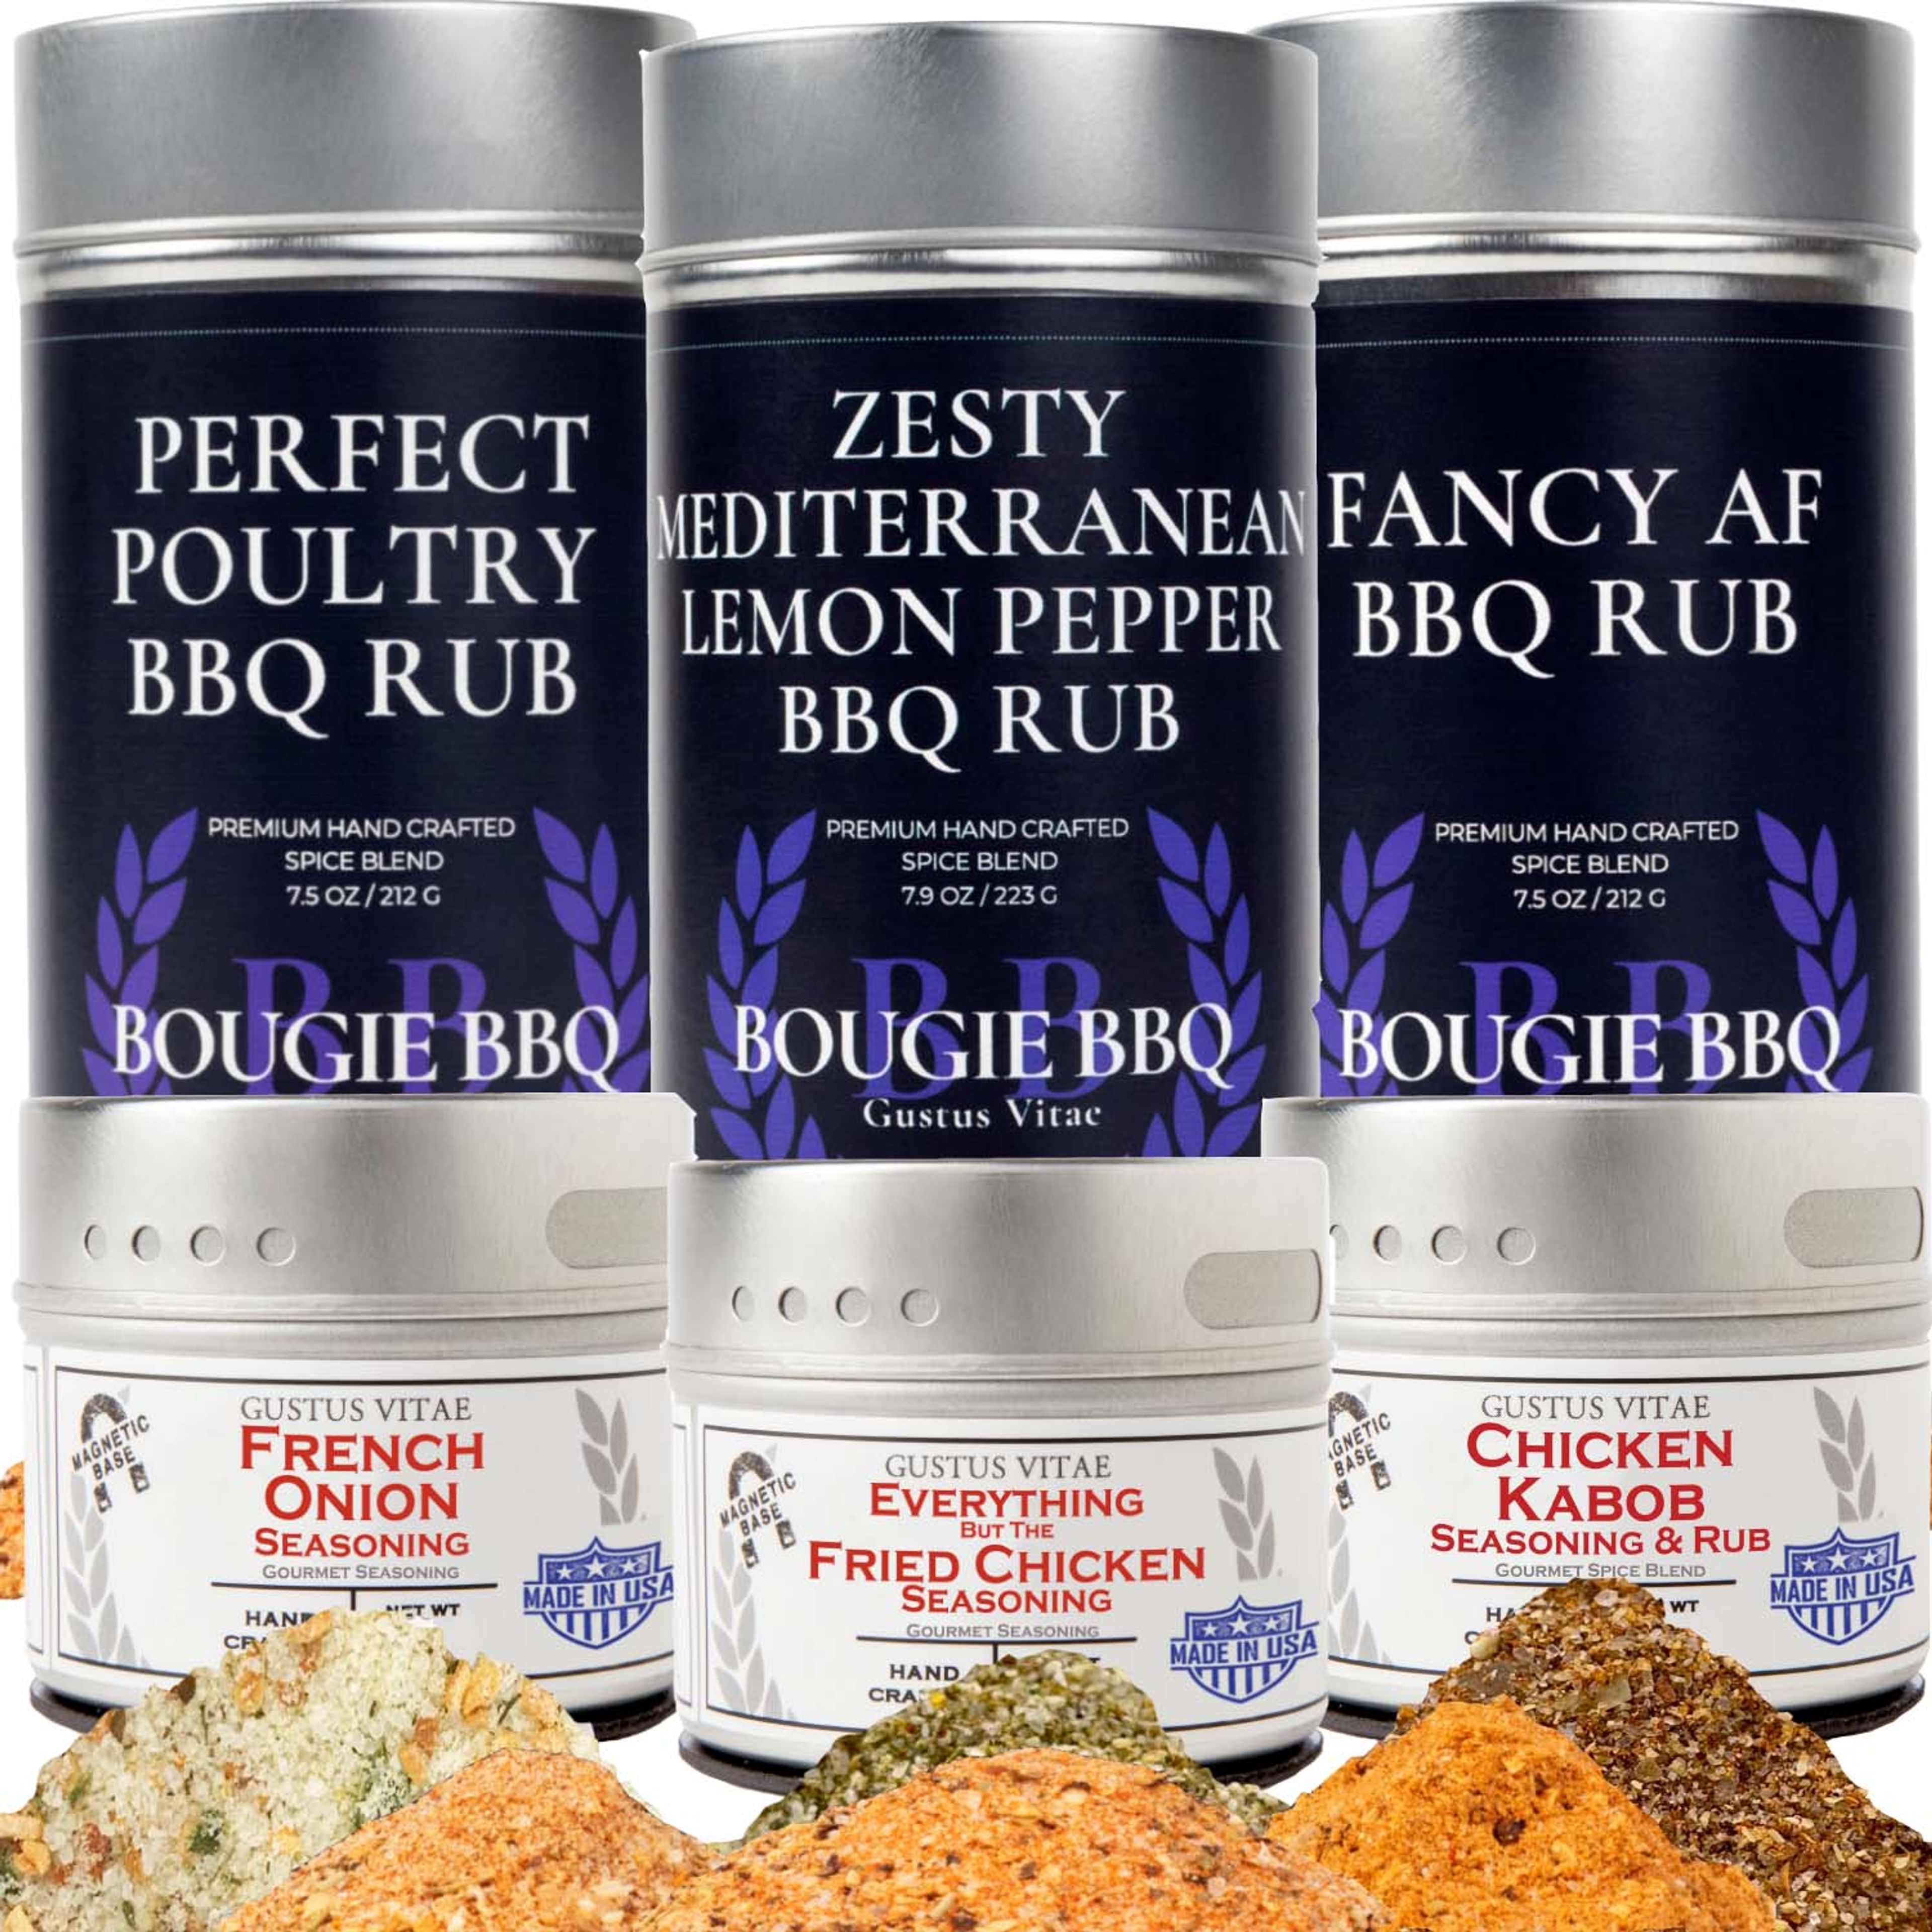 Perfect For Poultry | Complete 6 Pack Collection | Gourmet Seasonings and Rubs For Chicken, Duck, Turkey, and Wild Game